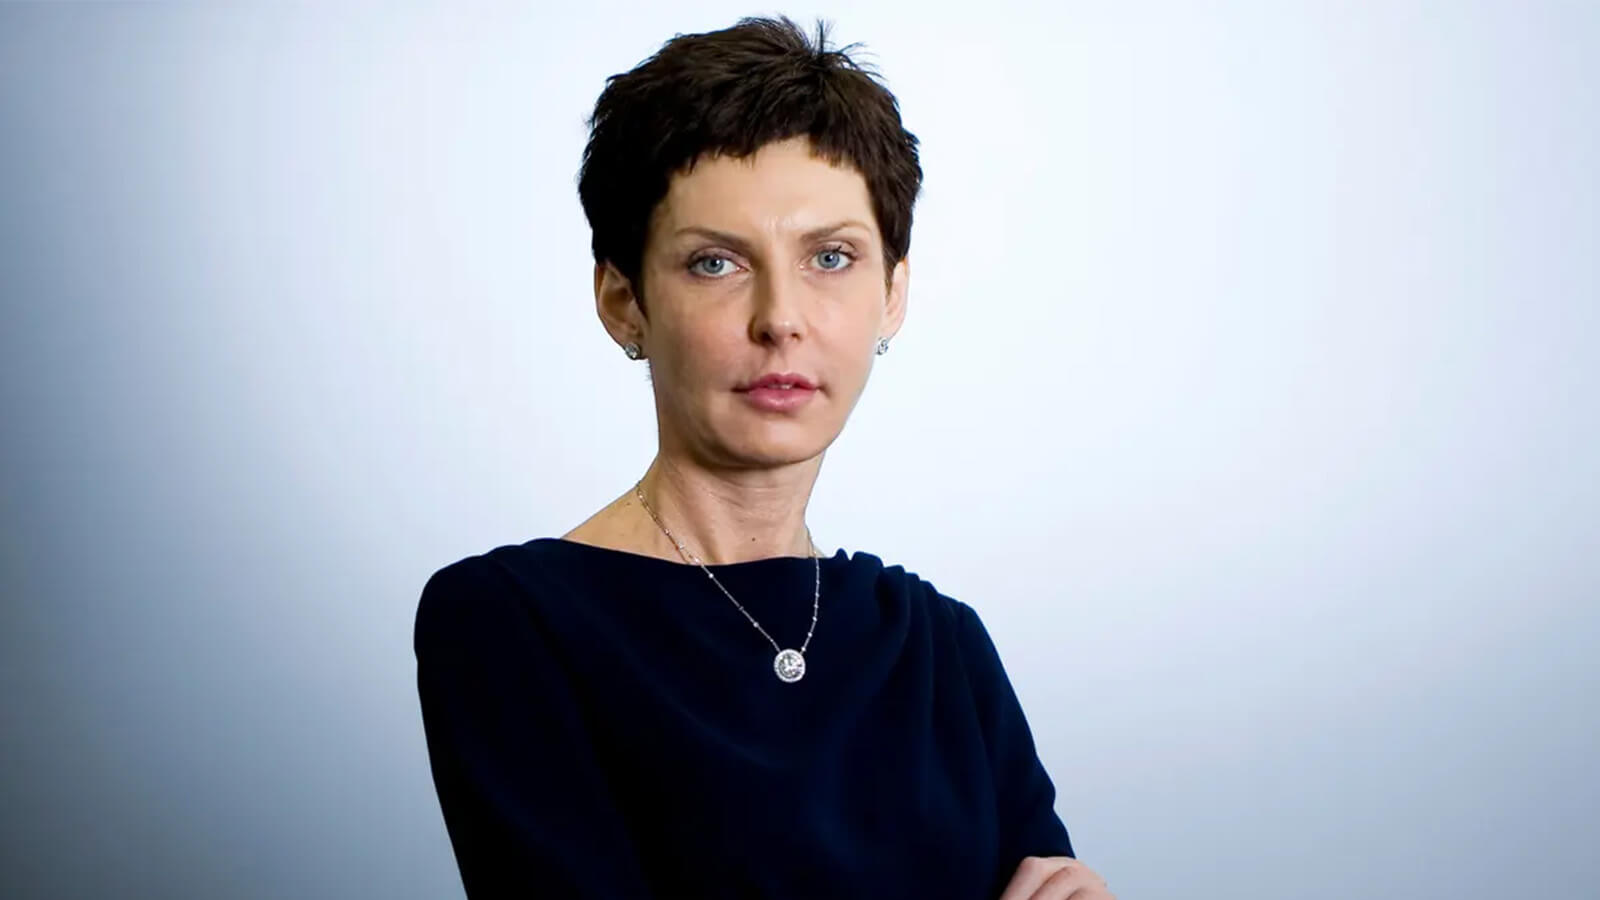 Denise Coates – Founder and co-CEO of Bet365